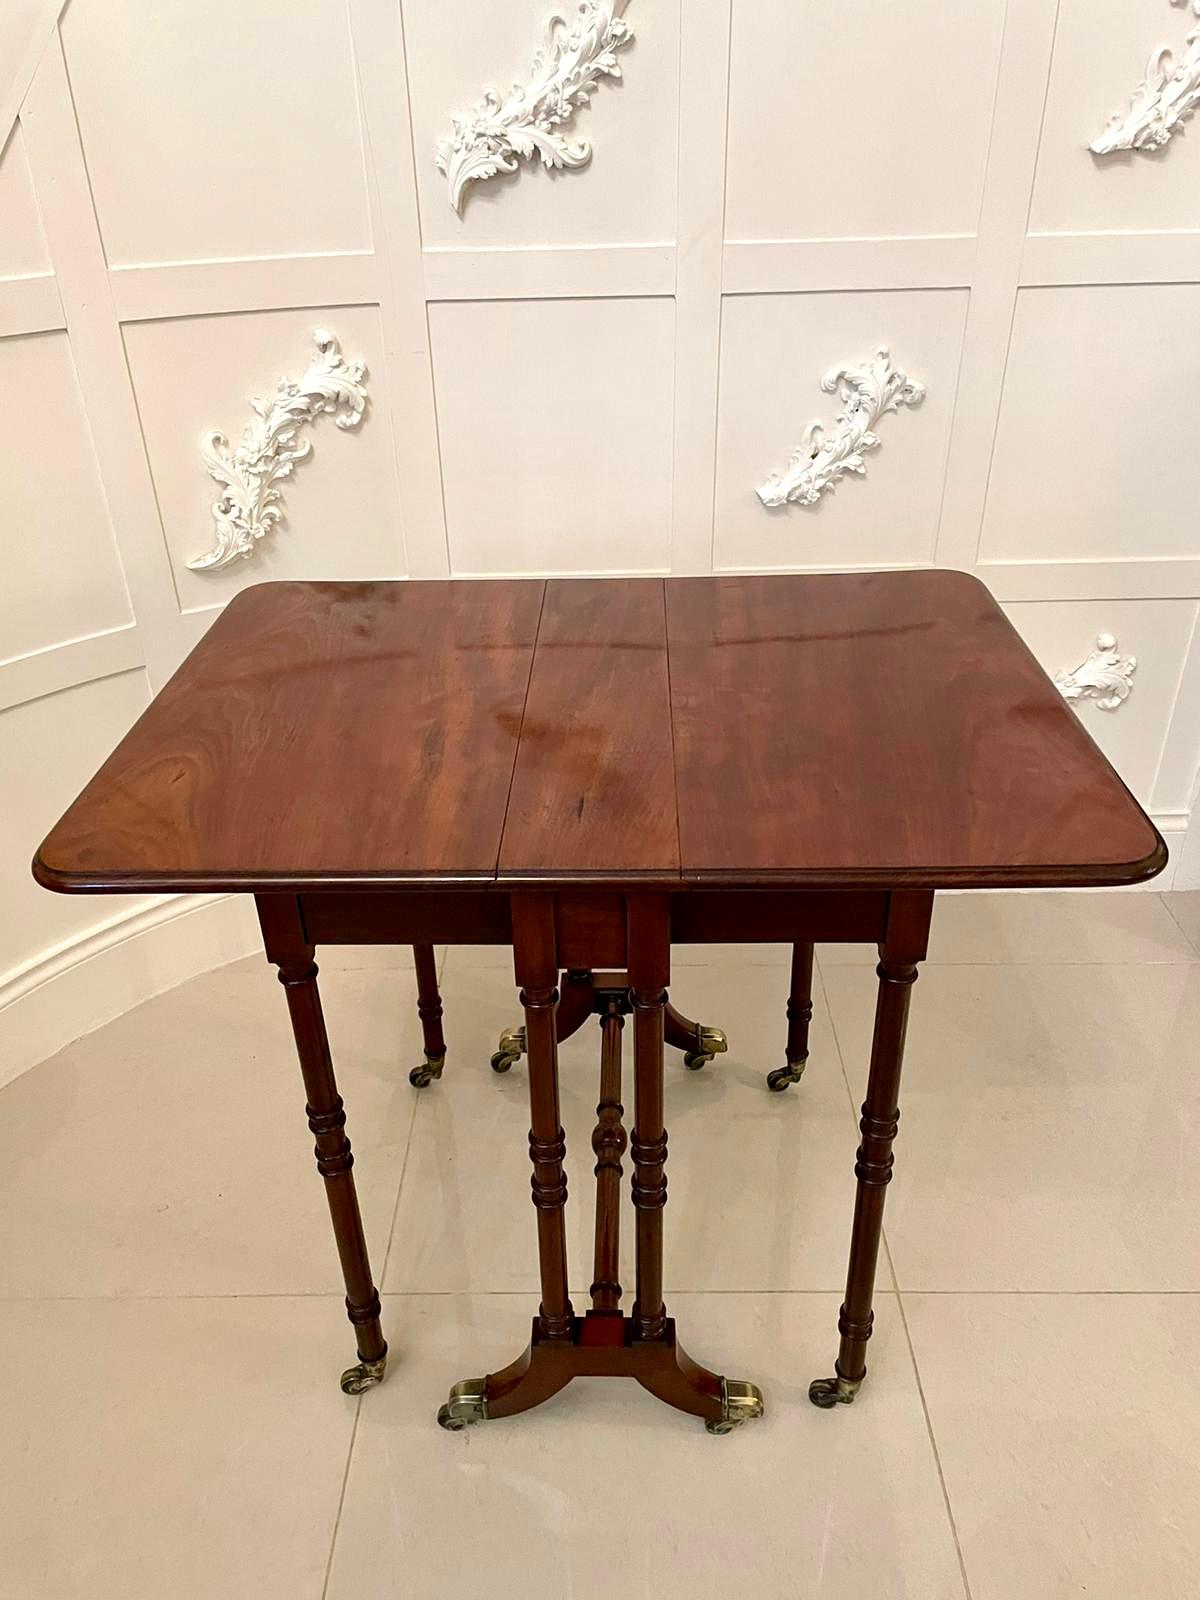 Antique Early 19th Century George III Mahogany Spider Leg Drop-Leaf Table For Sale 1